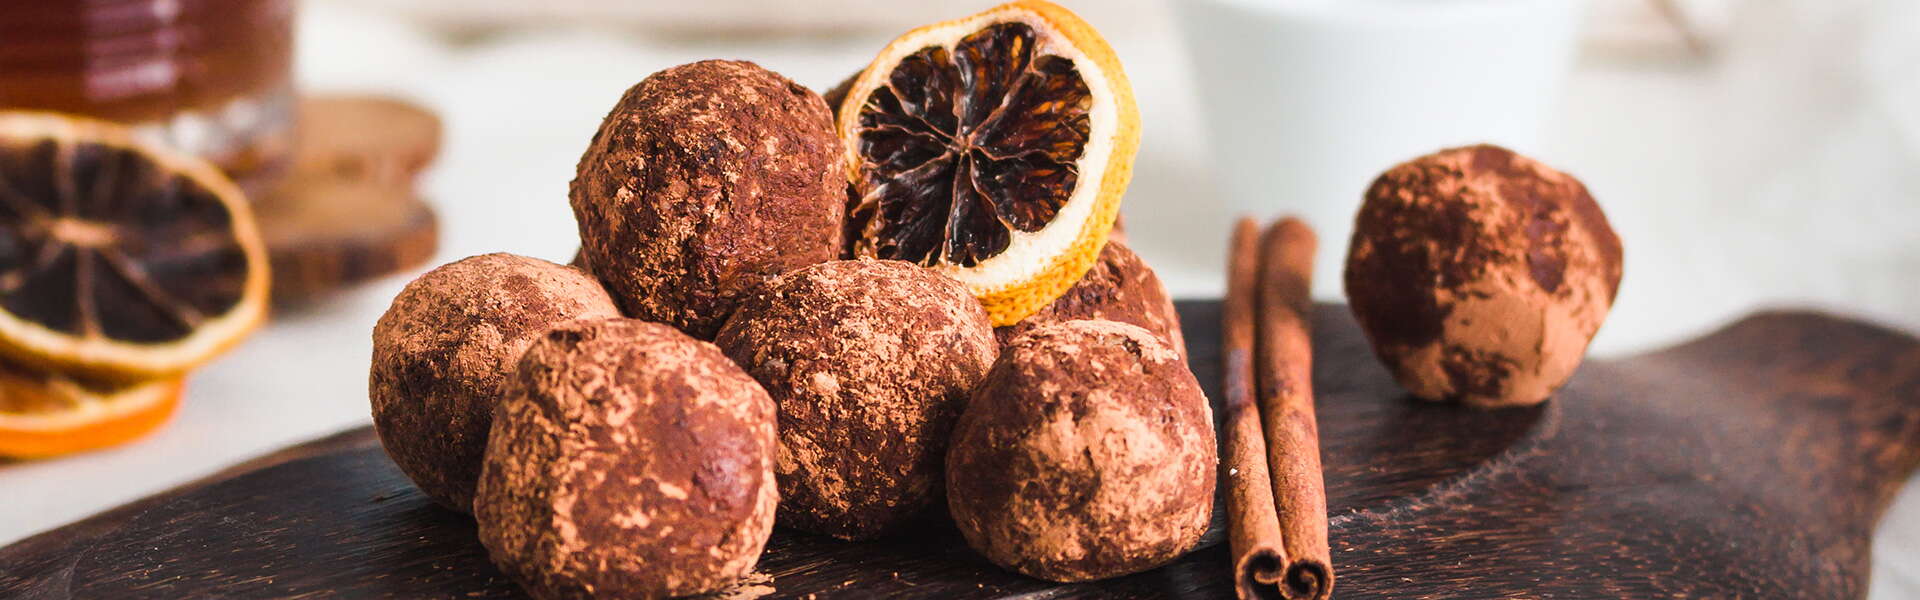 Bran's truffles flavored with orange and cinnamon